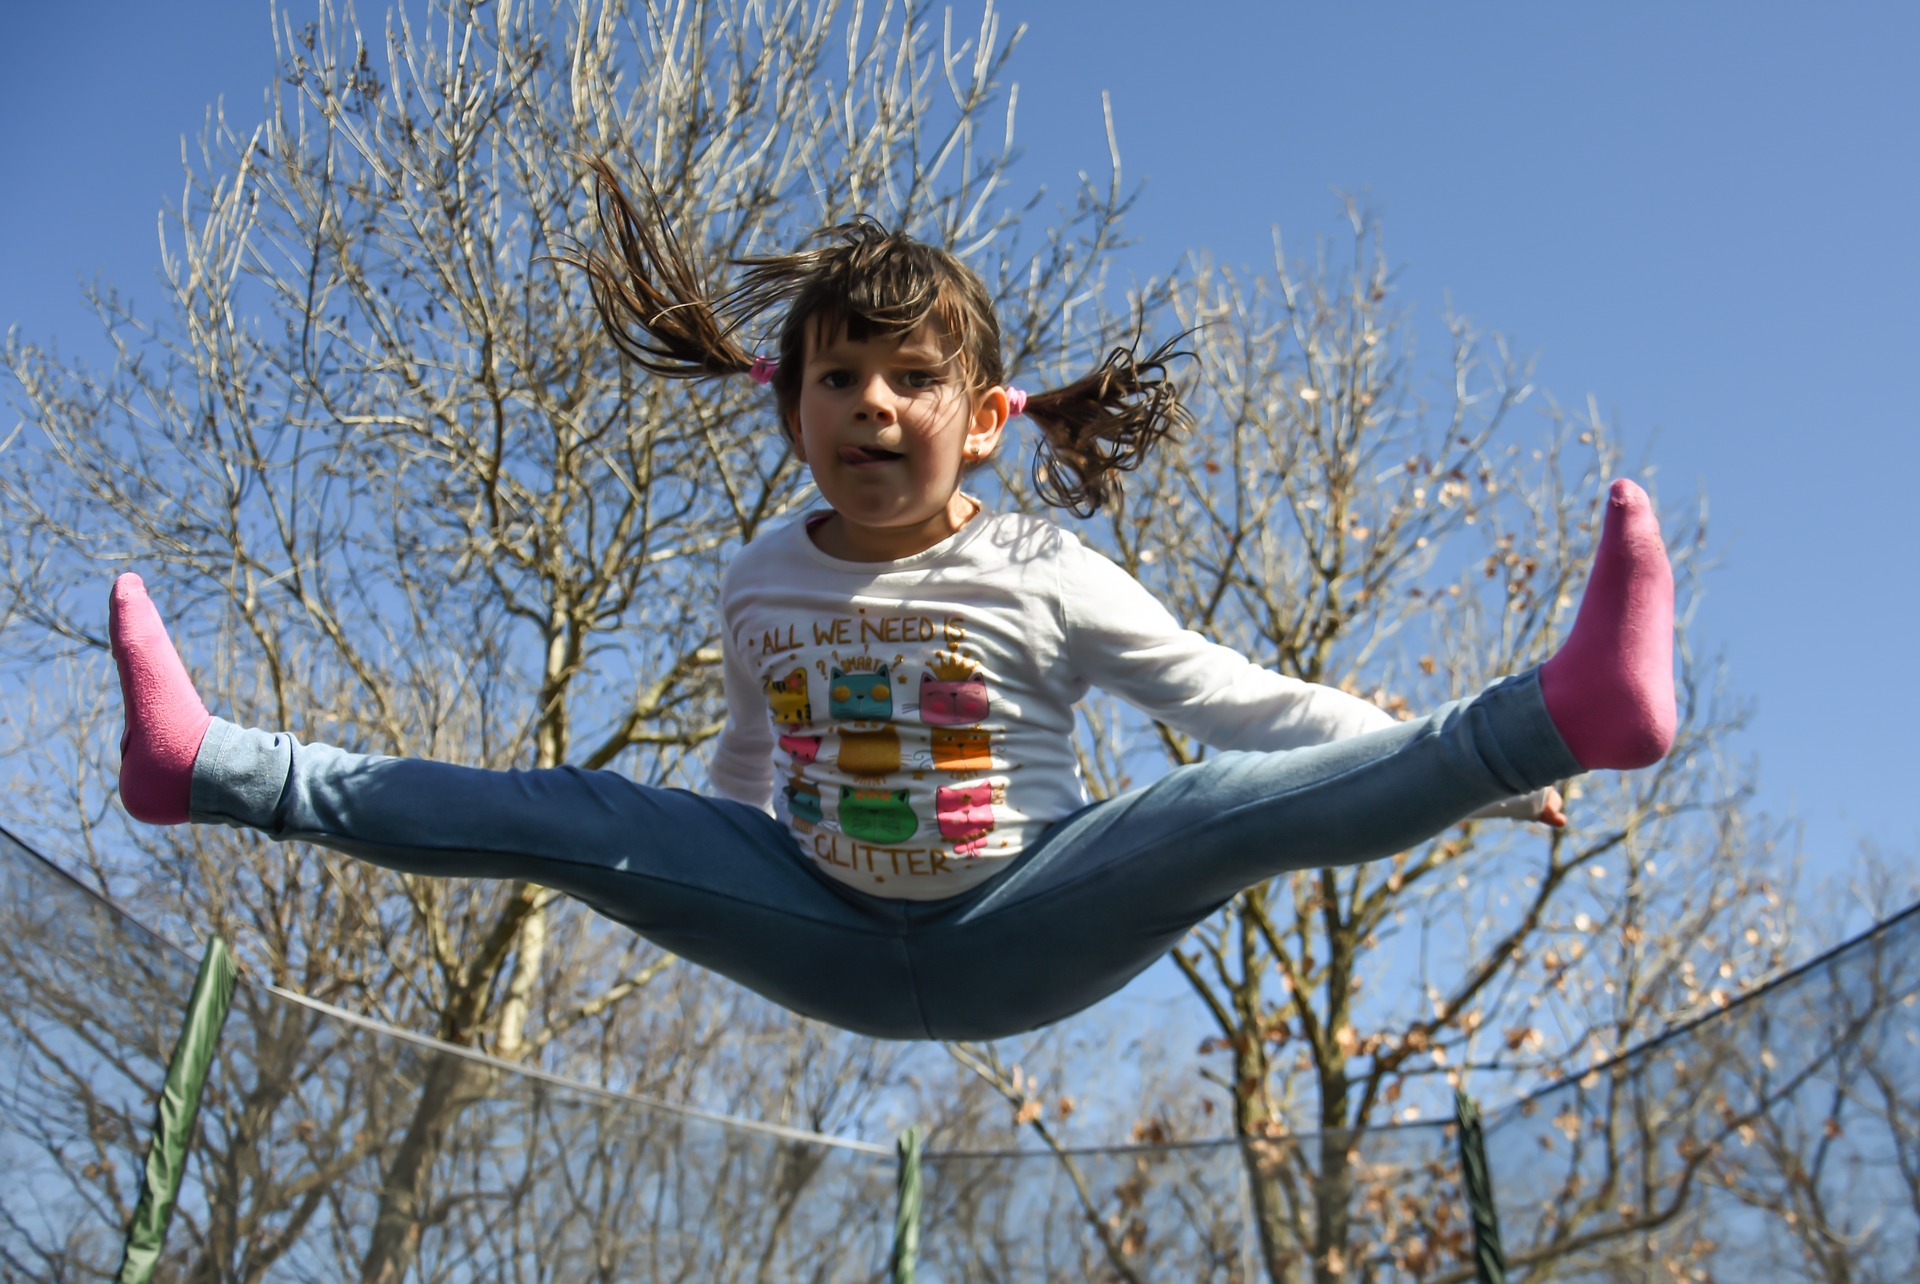 A small girl jumps high on her trampoline.